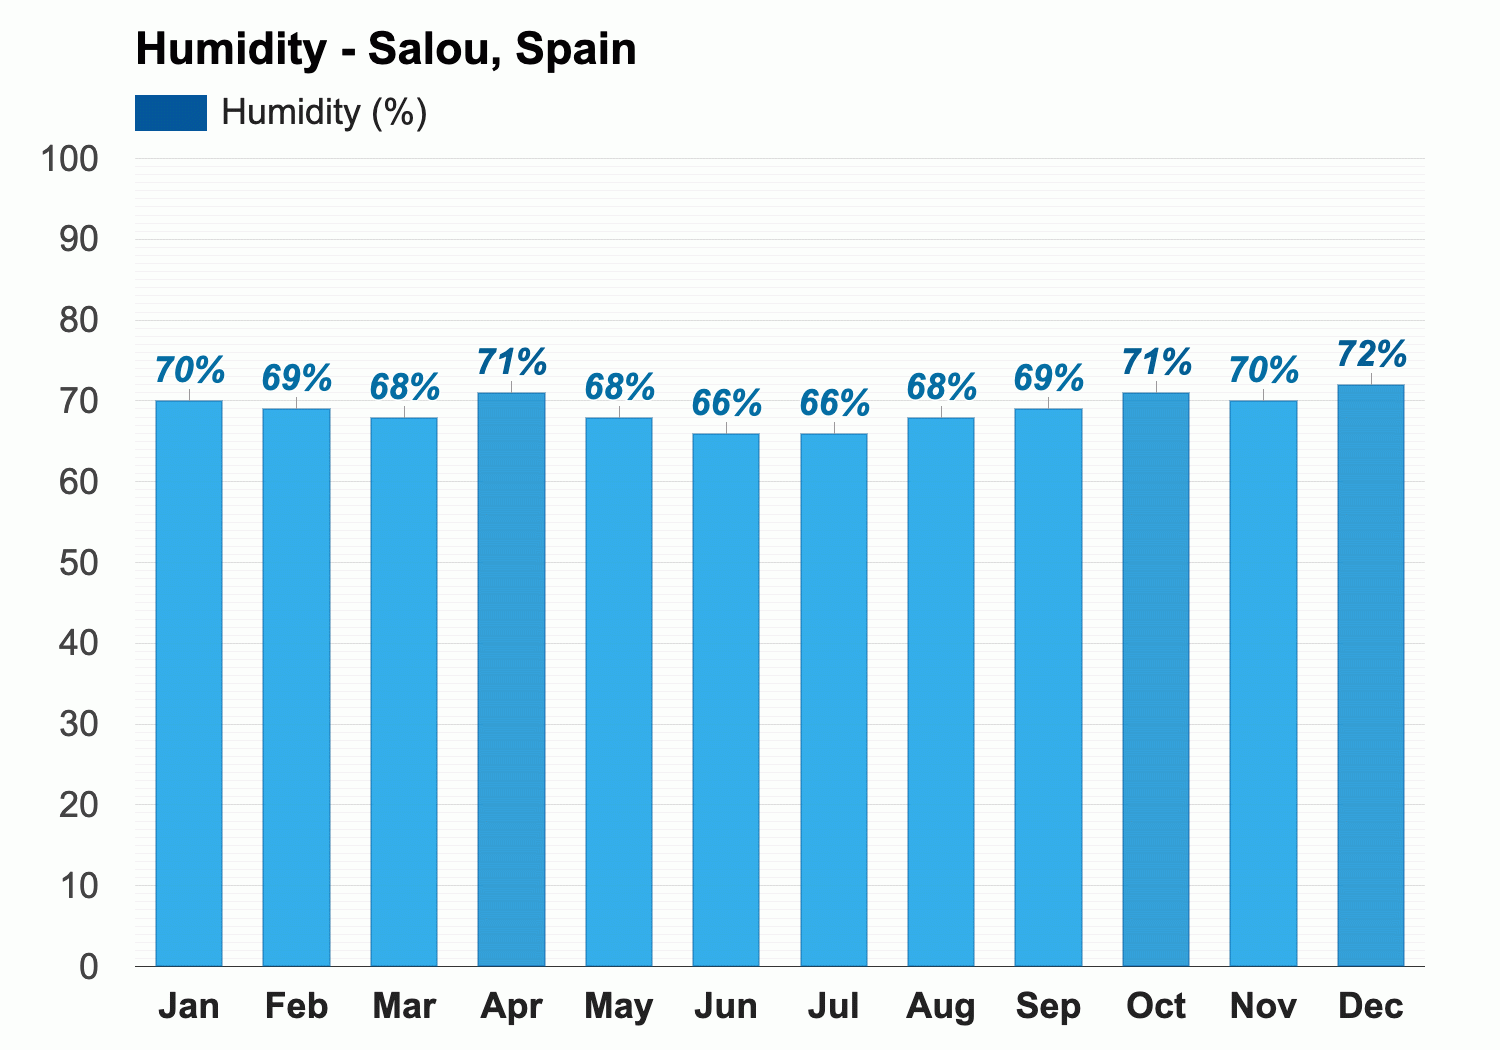 Salou, Spain - Climate & Monthly weather forecast